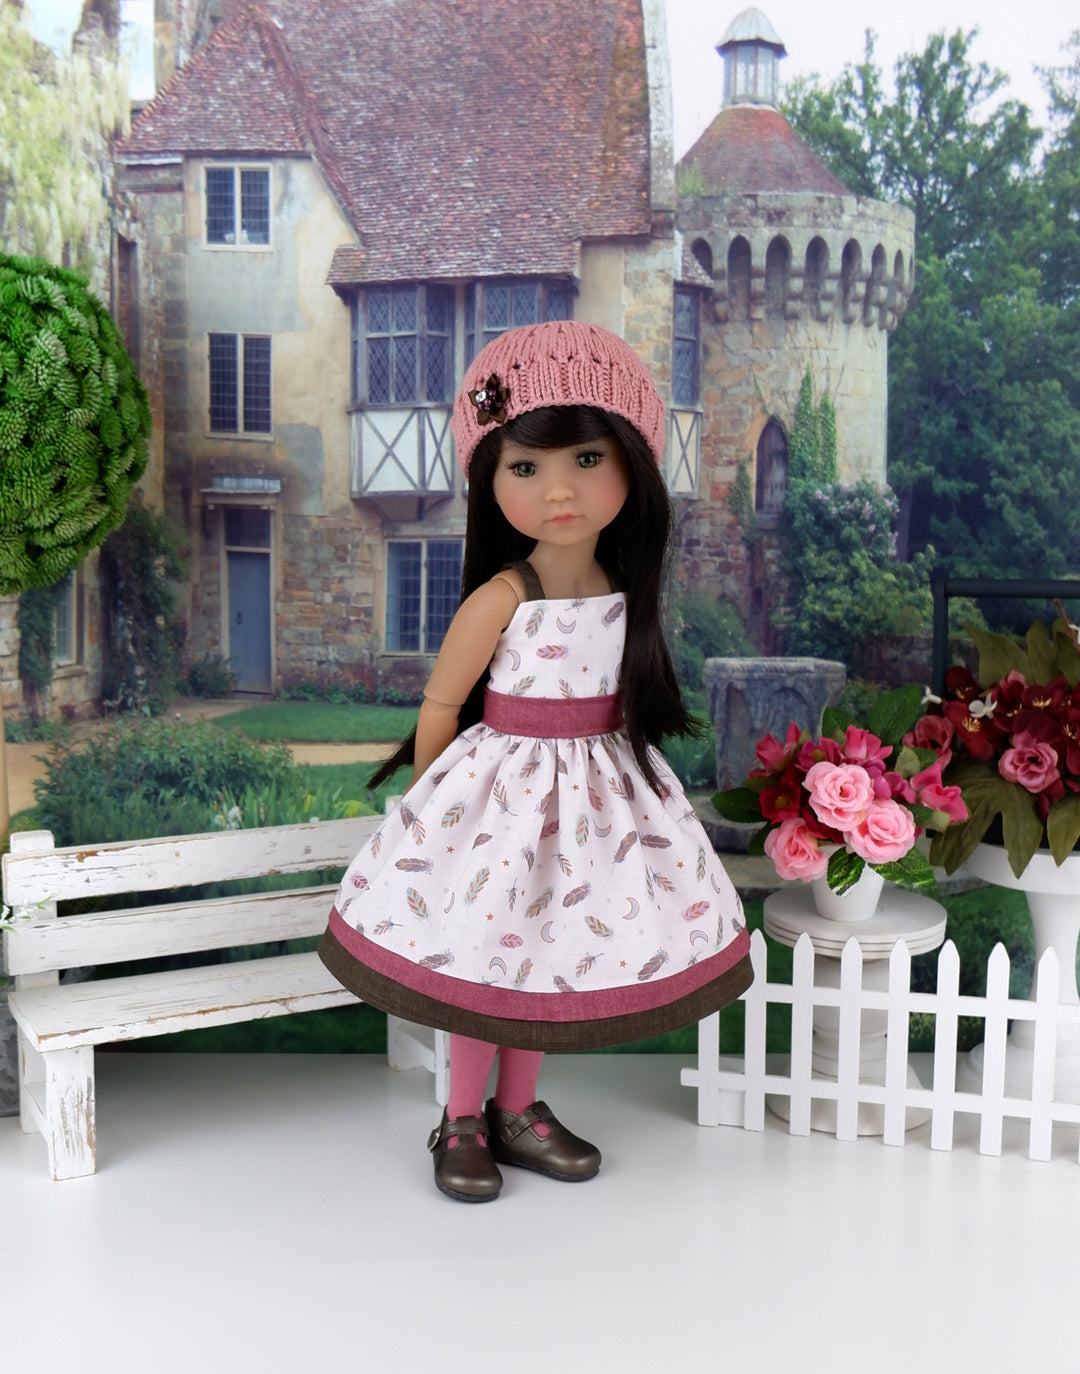 Celestial Feathers - dress and sweater set with shoes for Ruby Red Fashion Friends doll